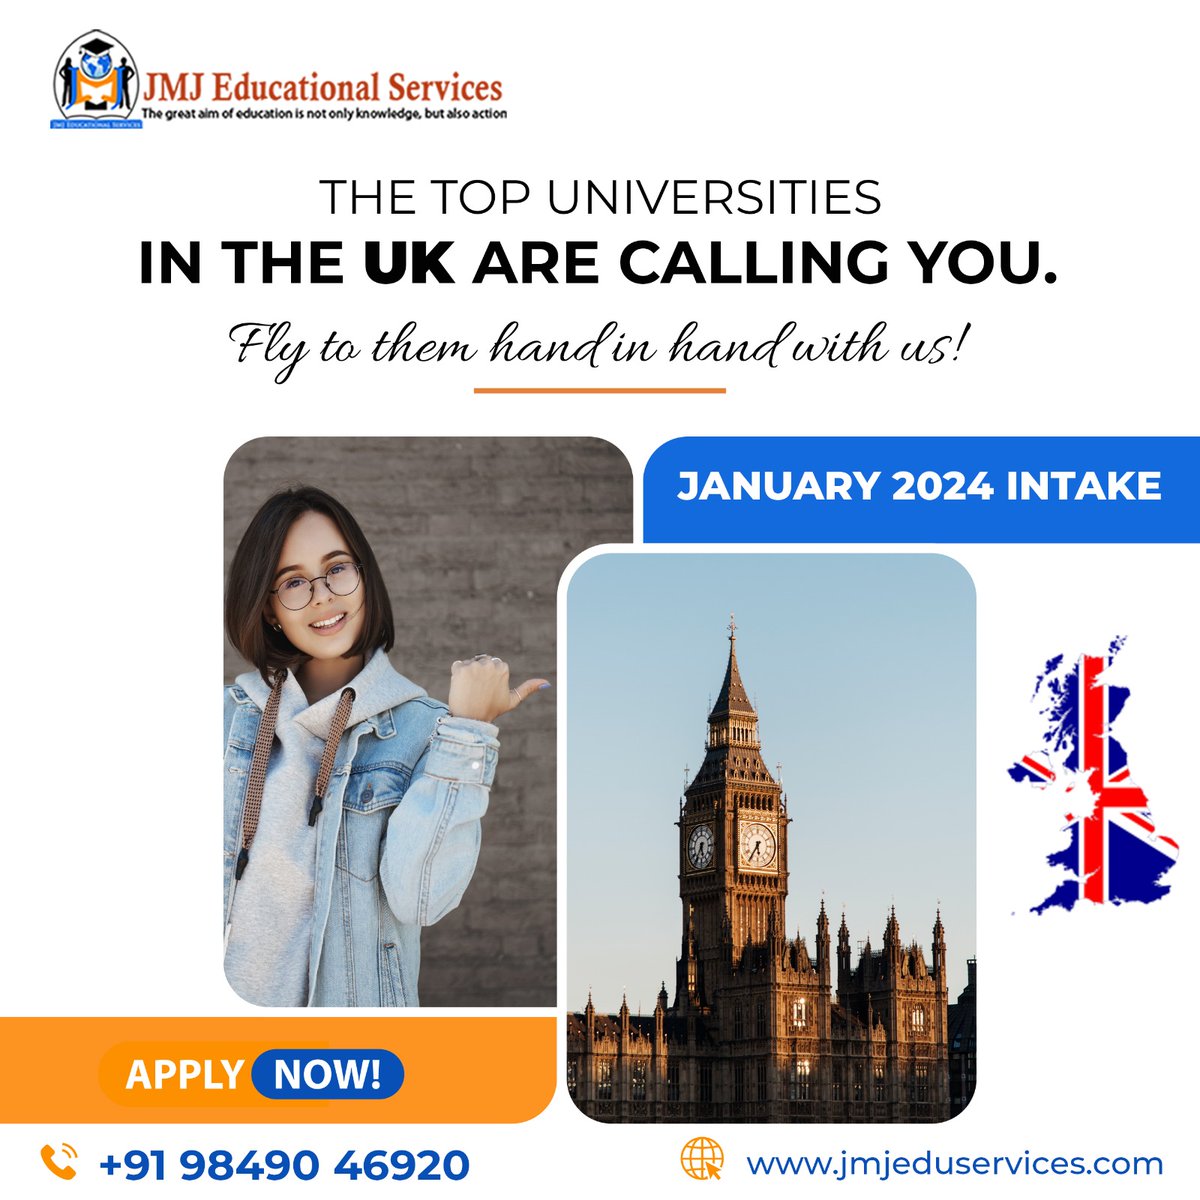 The universities in the UK have begun the process for January 2024 intake. Approach our UK student visa experts to learn all about the necessary process.
Call us: +91 98490 46920 / 79936 44399
Visit us: jmjeduservices.com
#JMJEduServices #JMJEdu #UKStudy #StudyinUK